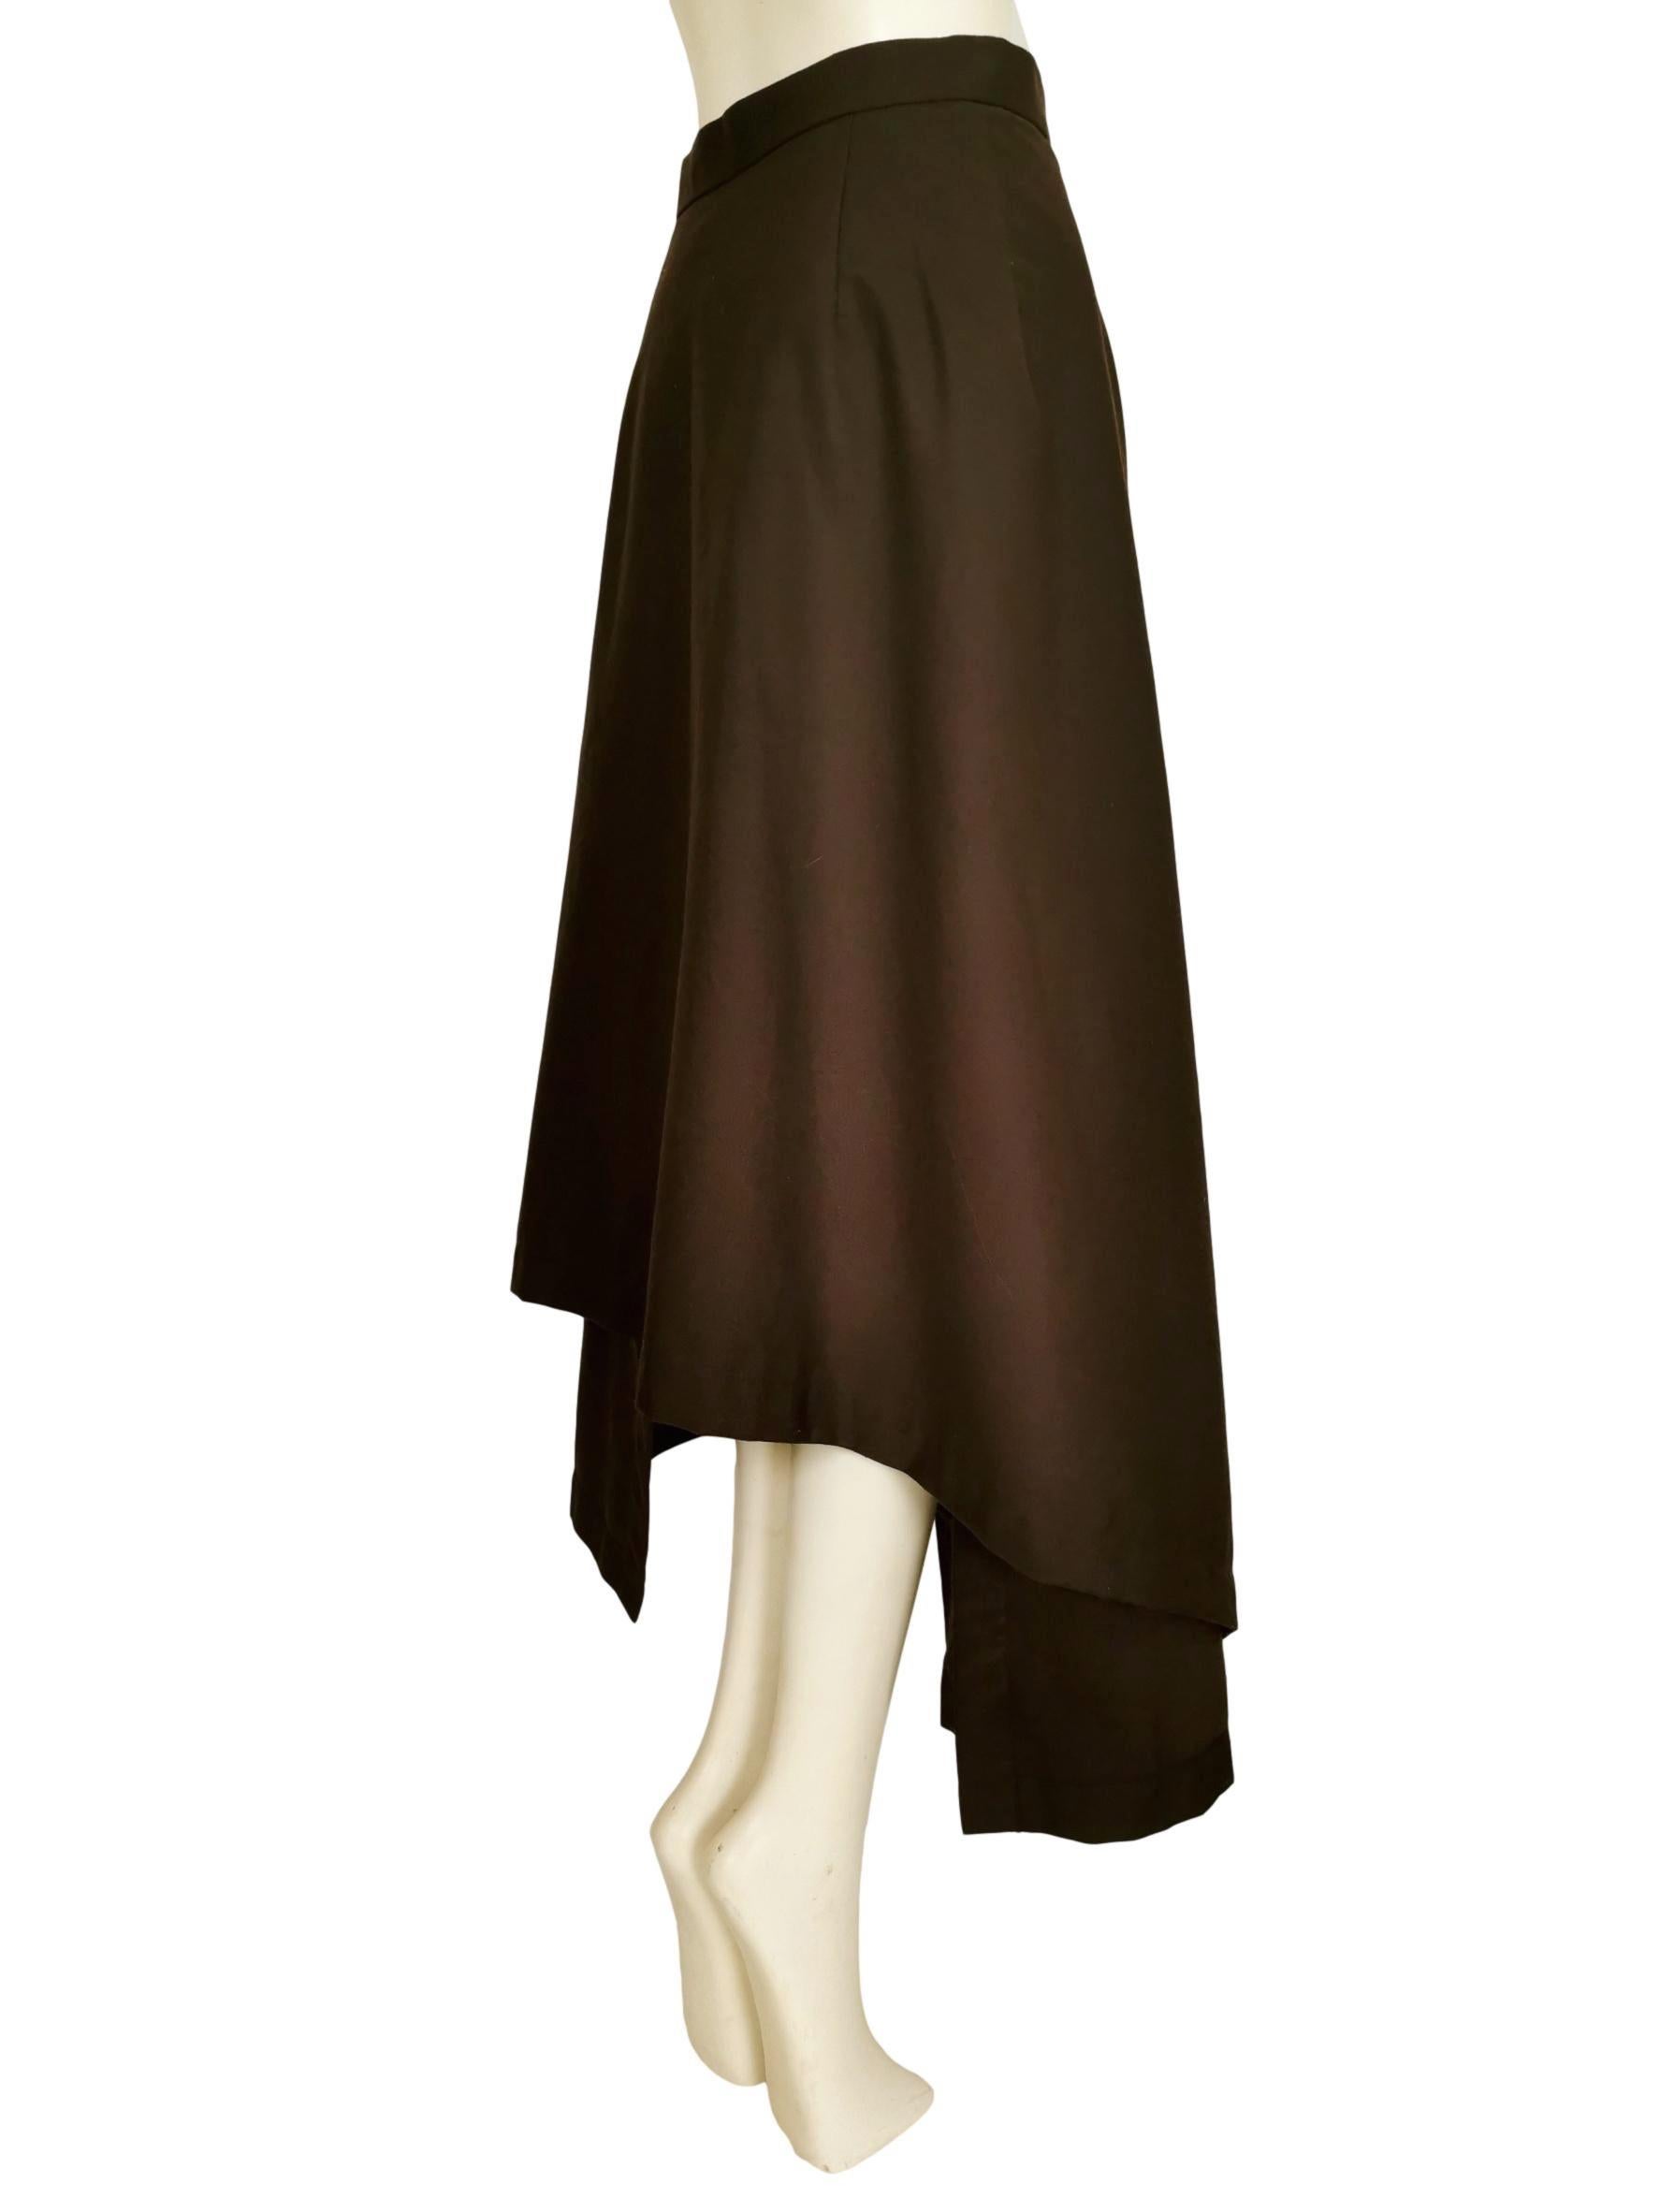 Comme des Garcons Wrap Around Skirt AD 1996 For Sale 6